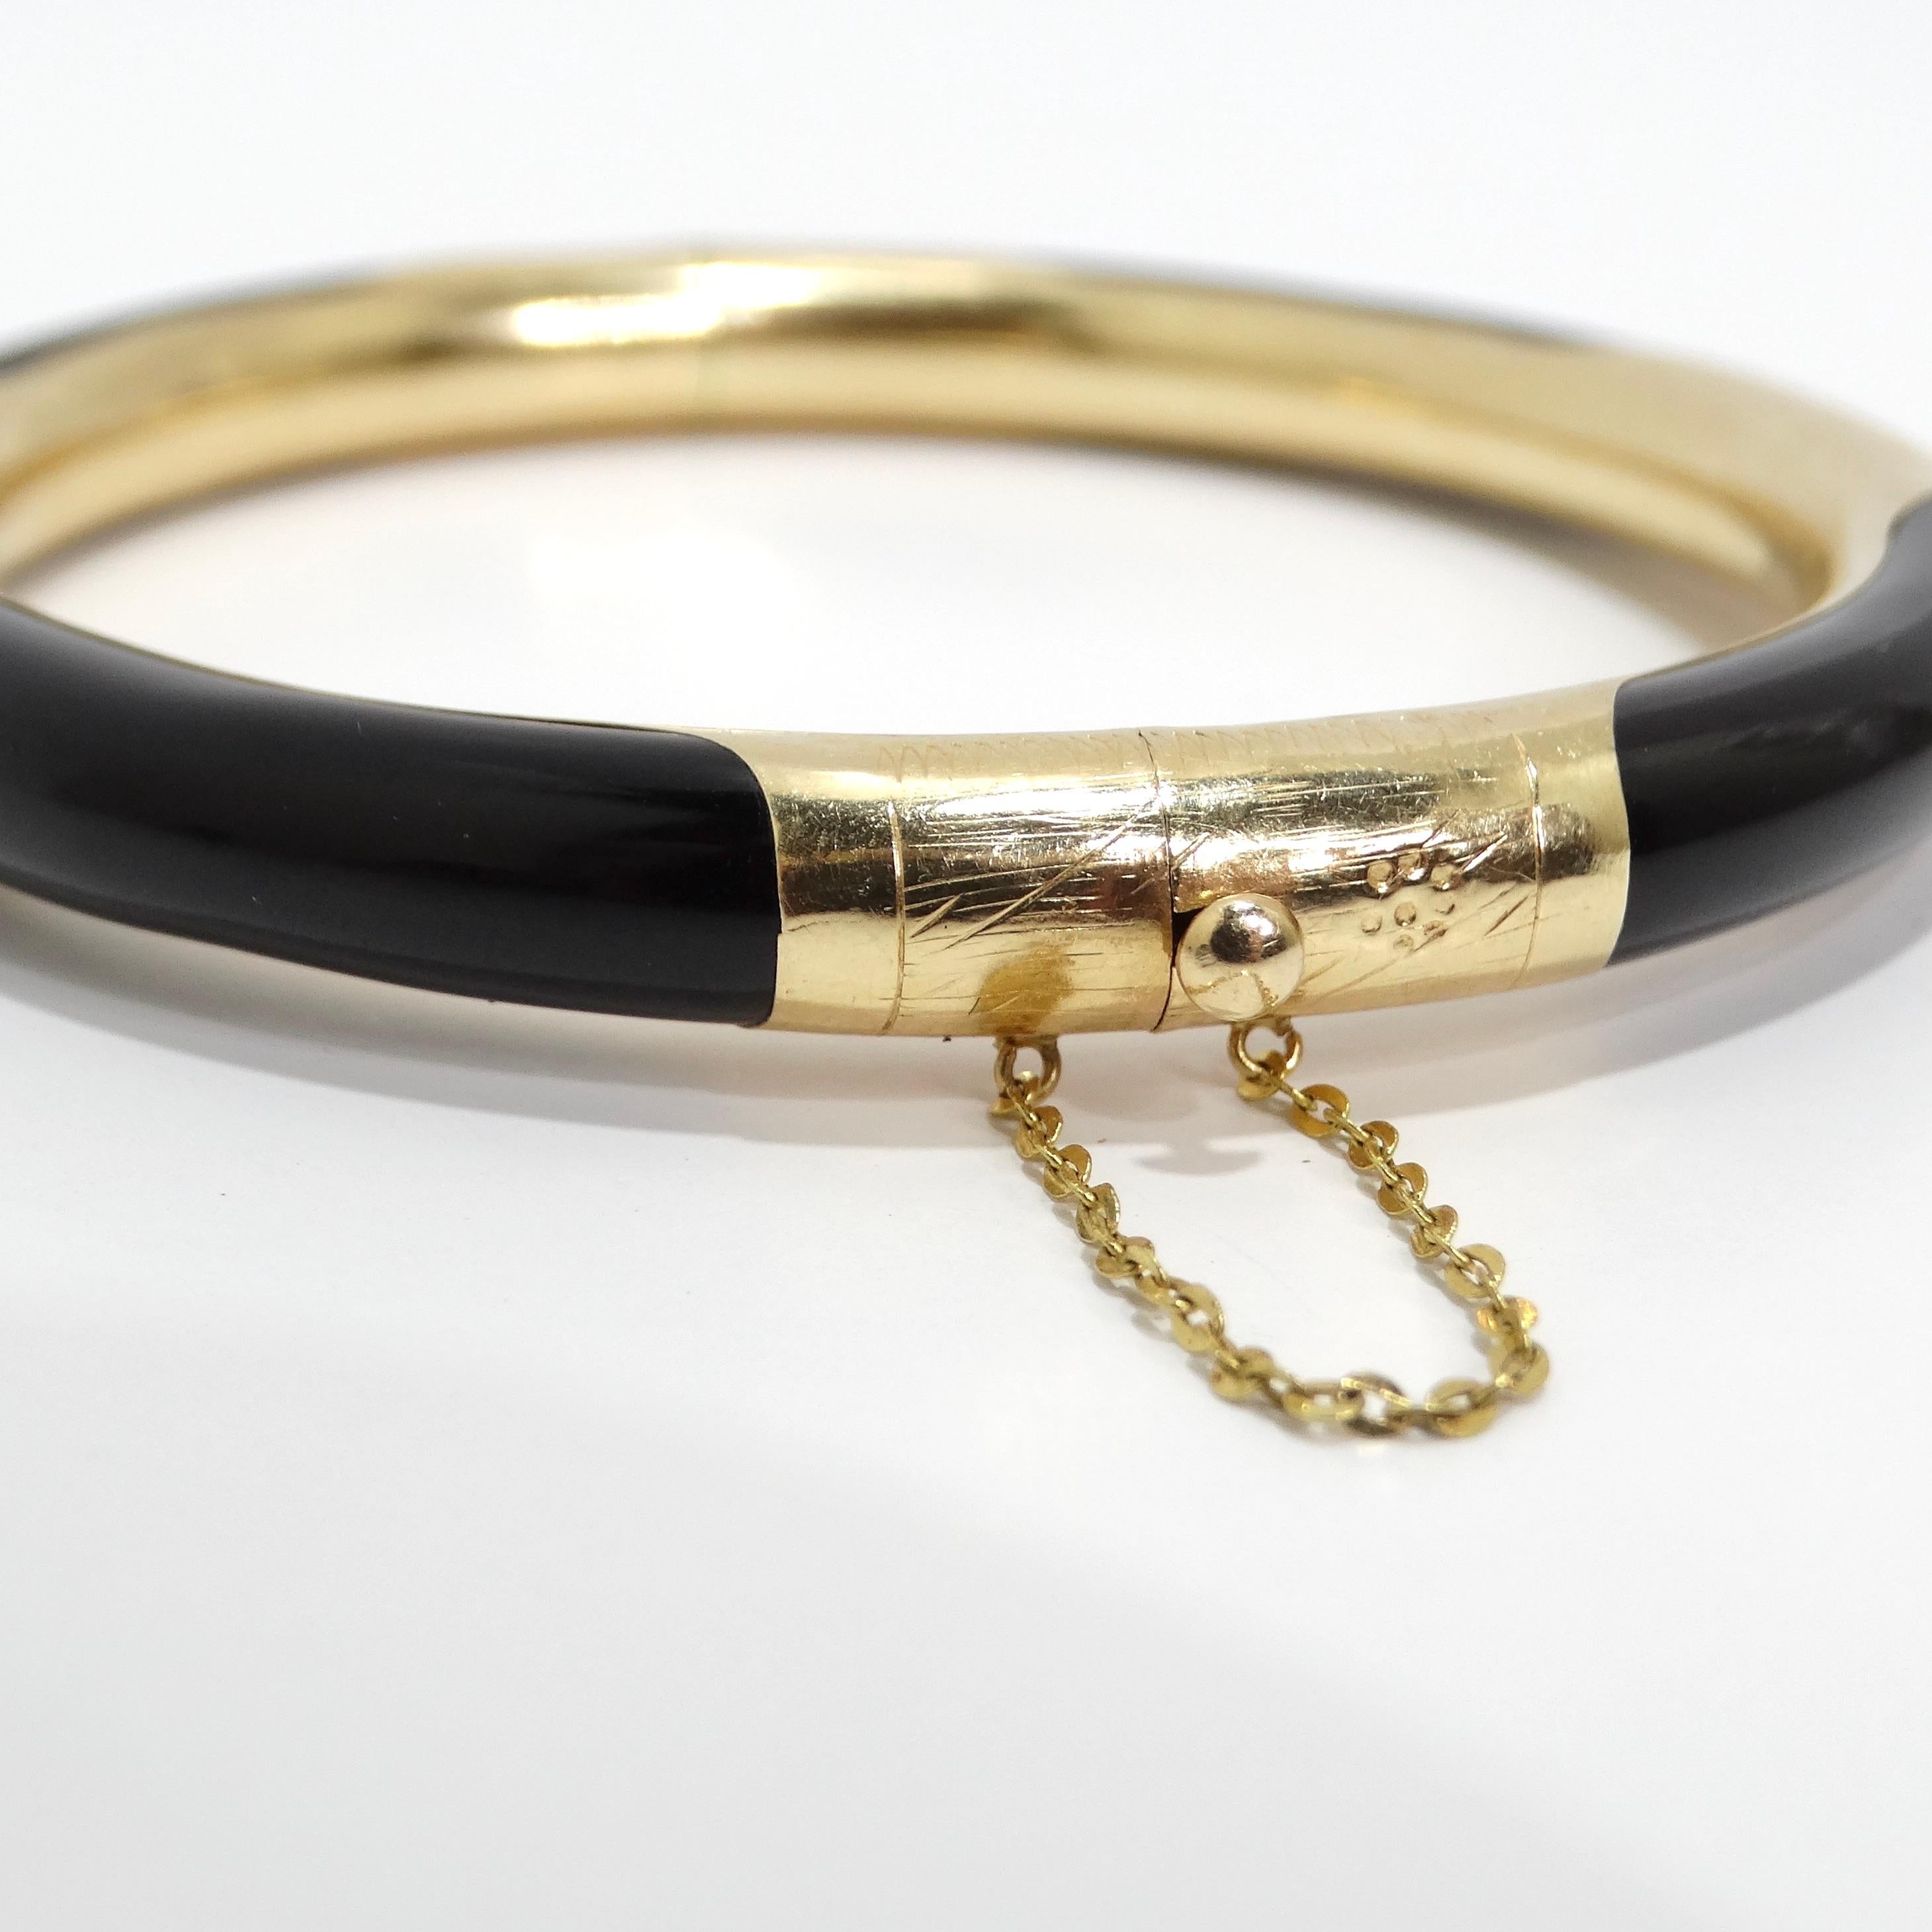 Elevate your wrist with the timeless sophistication of the 14K Gold Black Onyx Hinged Bangle Bracelet. This exquisite hinged bangle combines the opulence of luxurious black onyx with intricate 14k gold detailing, adorned with Asian decorative